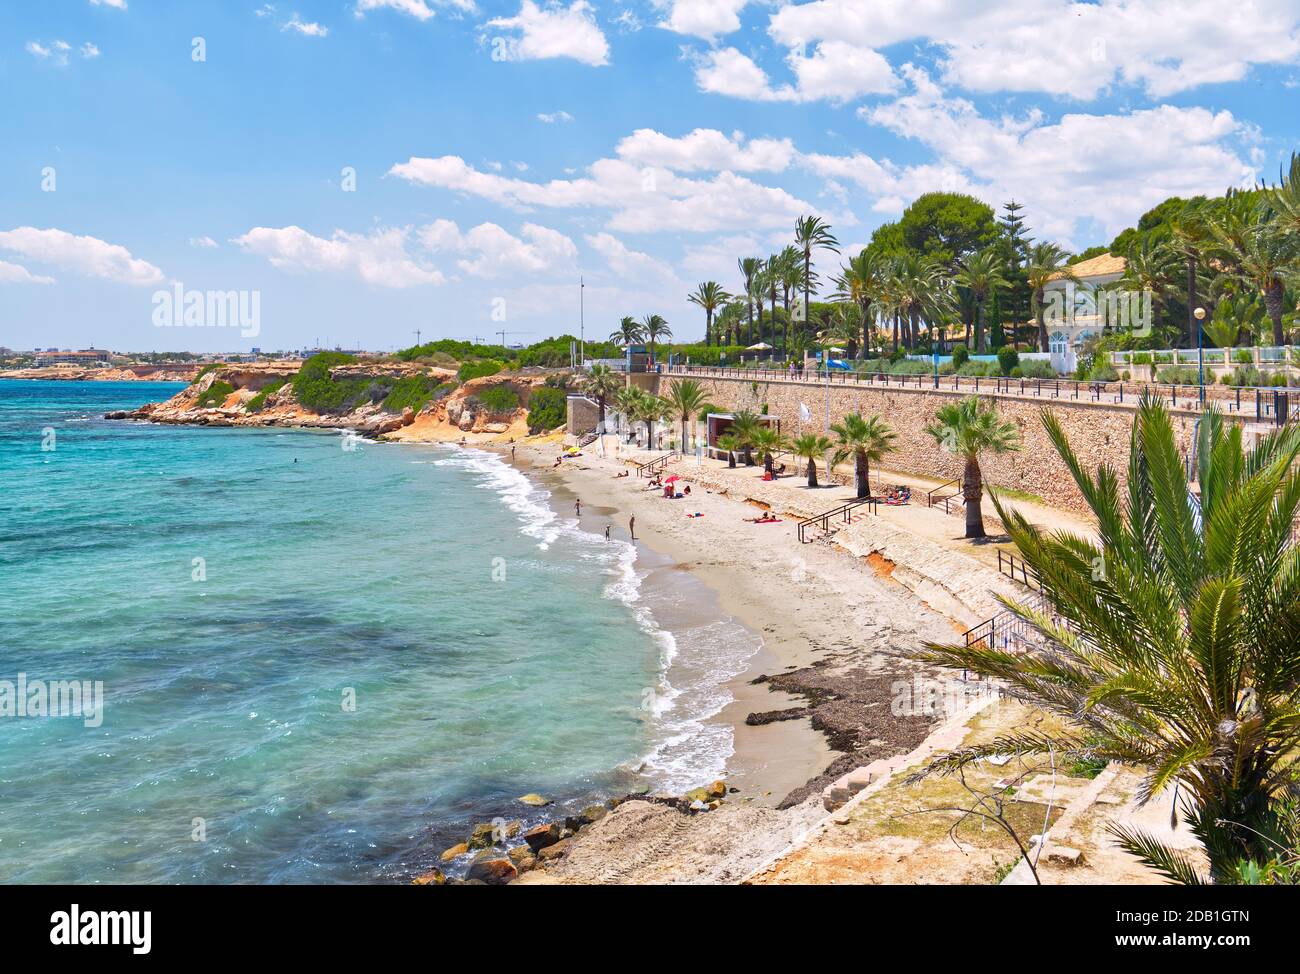 Sandy beach and Mediterranean sea view during warm sunny day